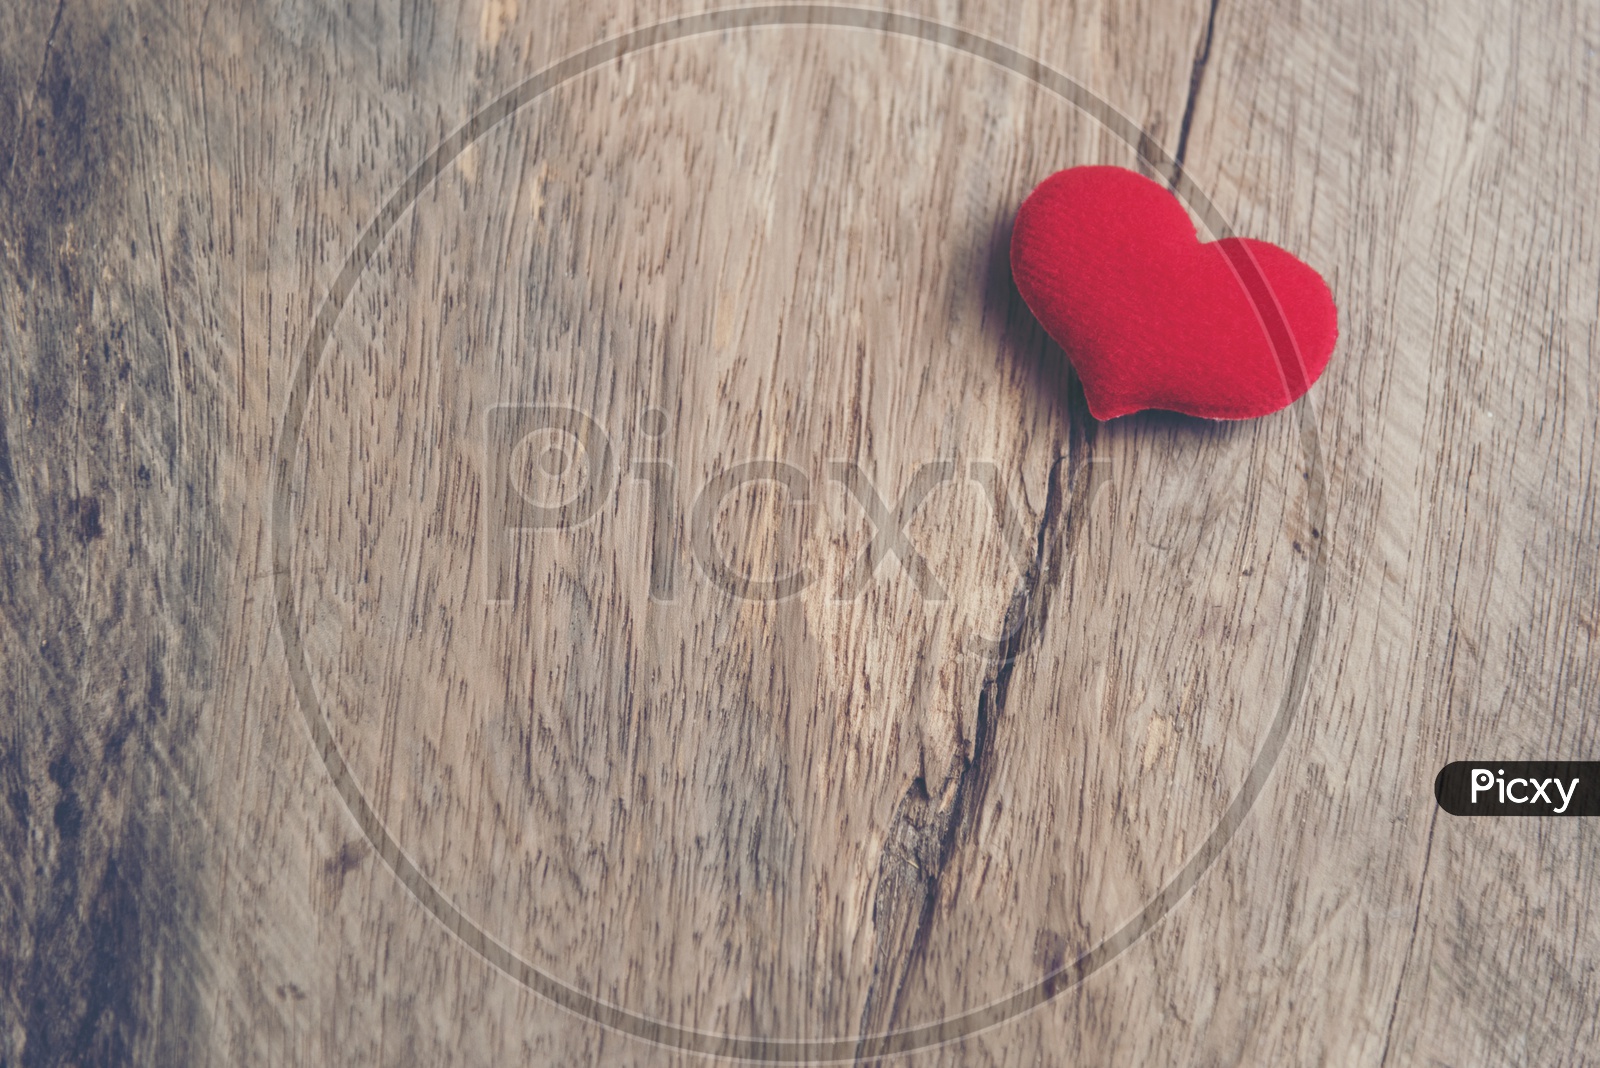 Valentines Day Love Concept With Red heart Shape On an Wooden Table  With Vintage Filter